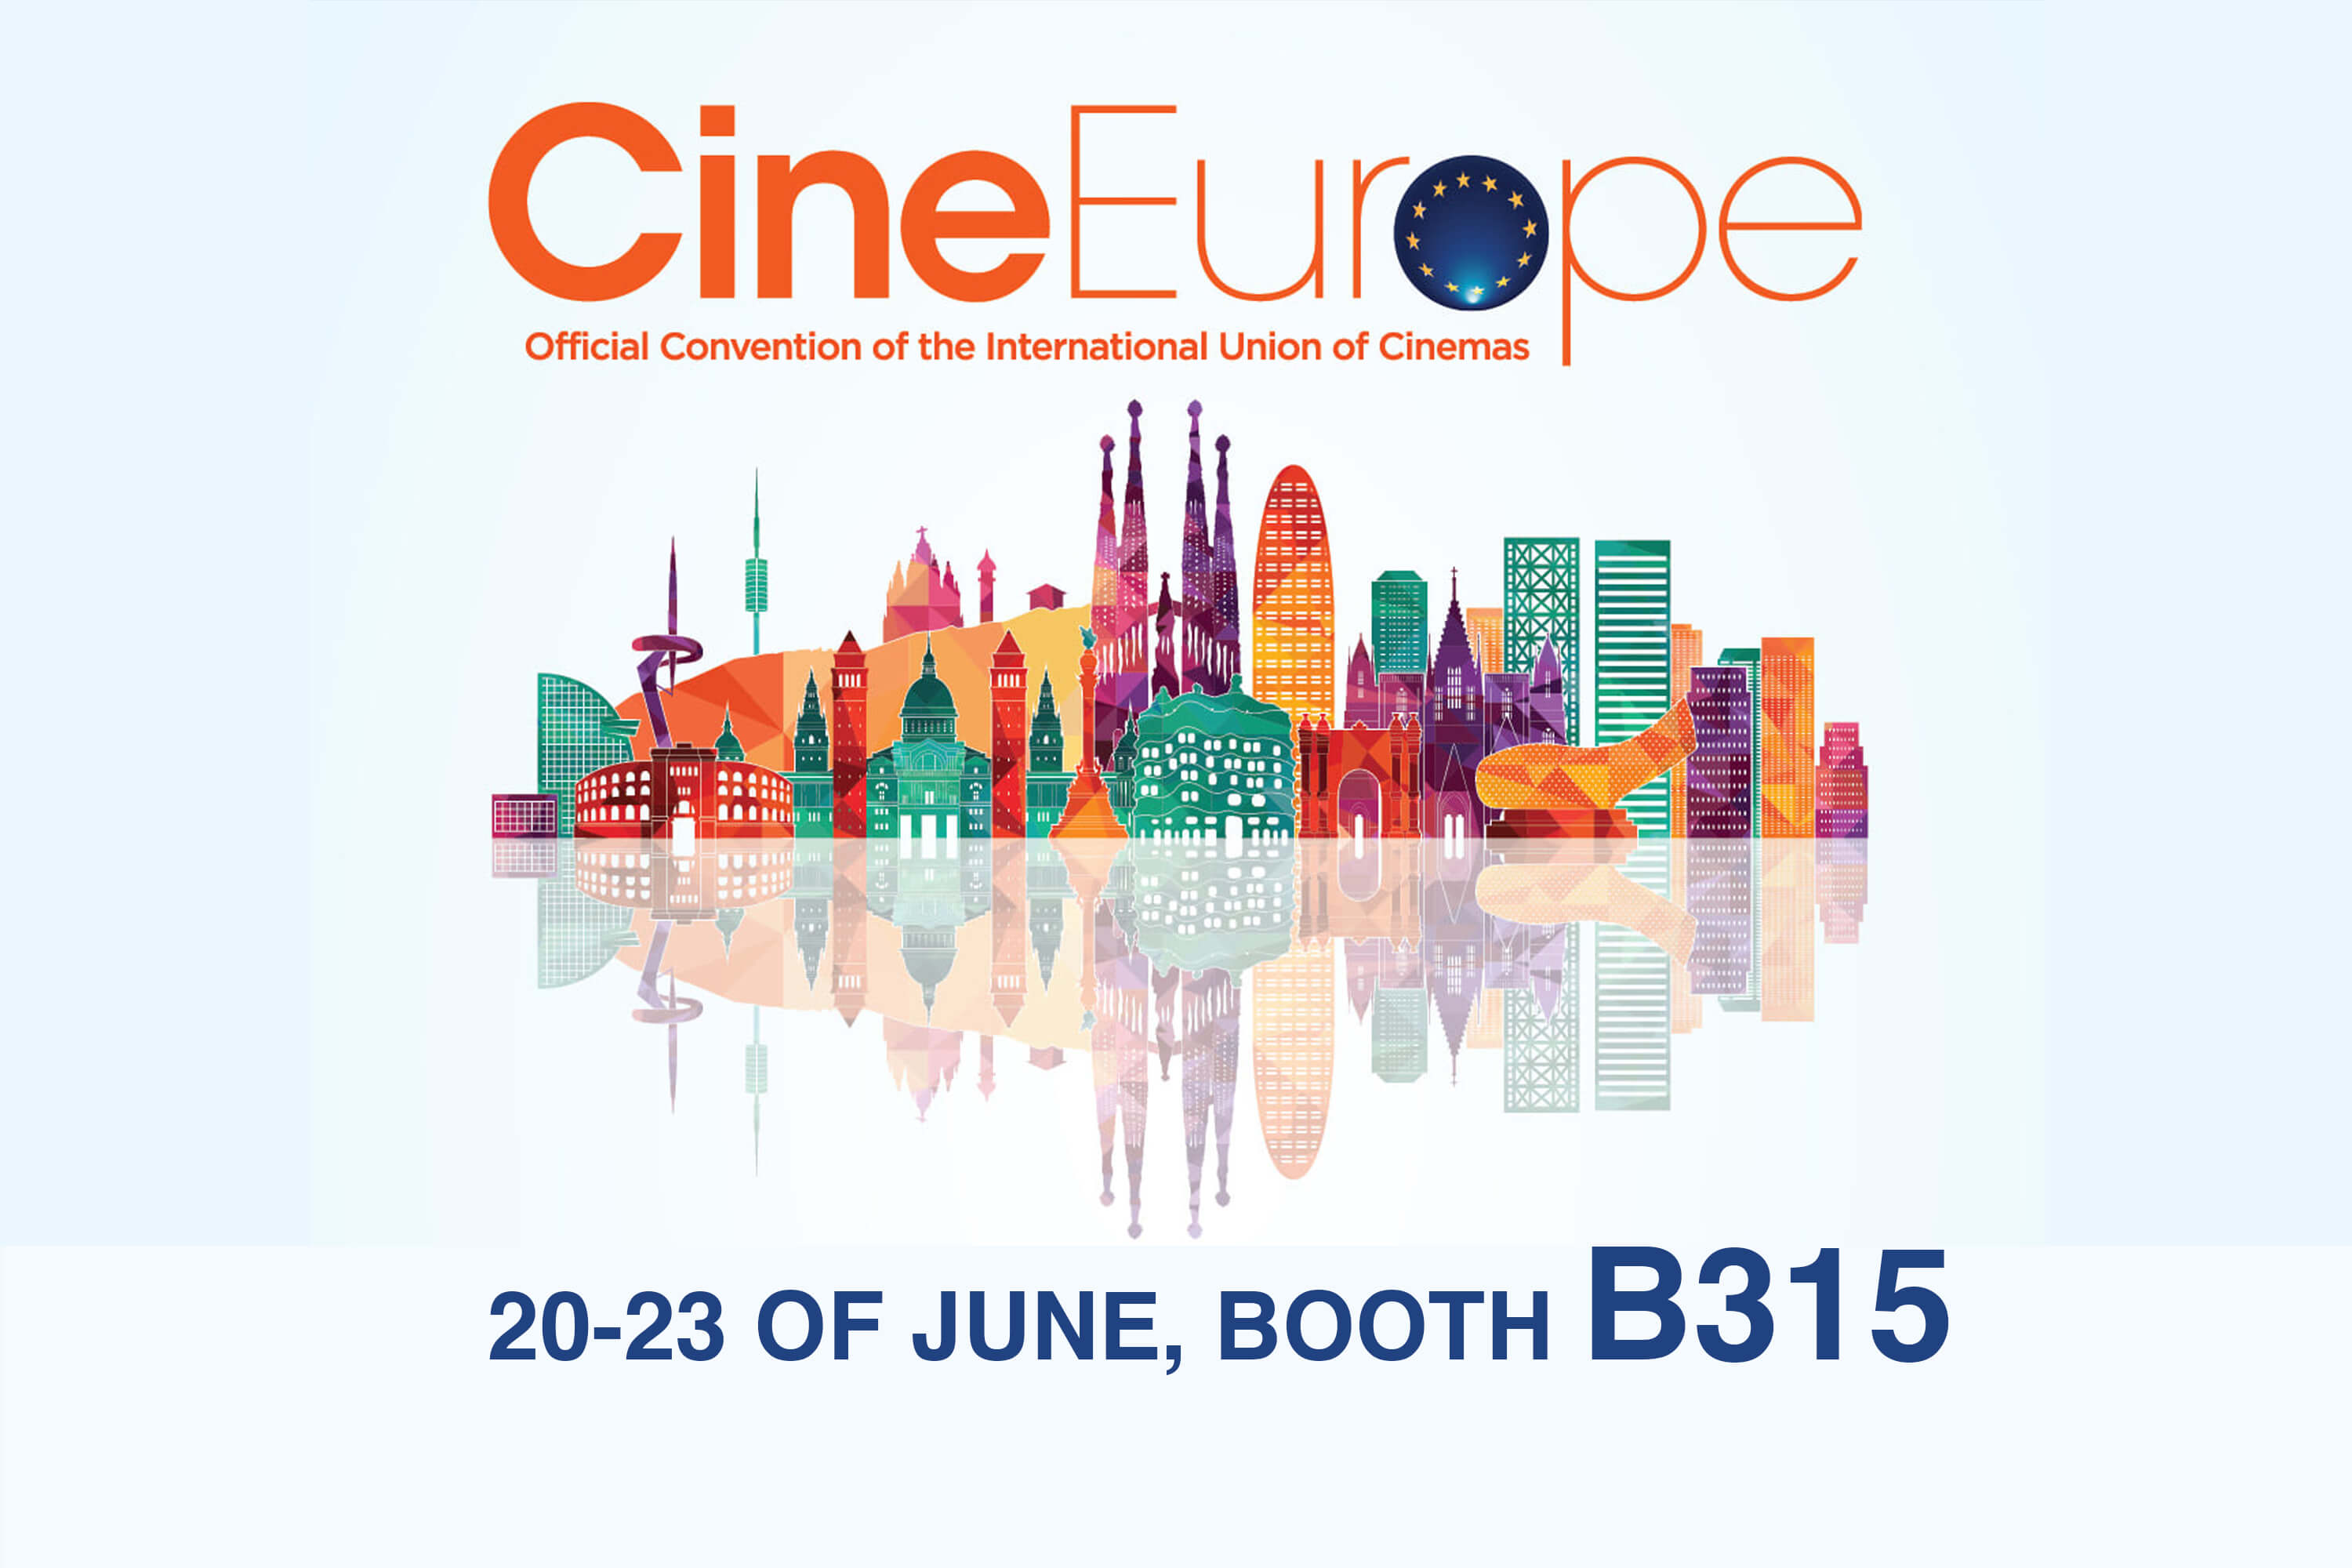 K+, together with Ferco and Quinette for another year at CineEurope 2022!